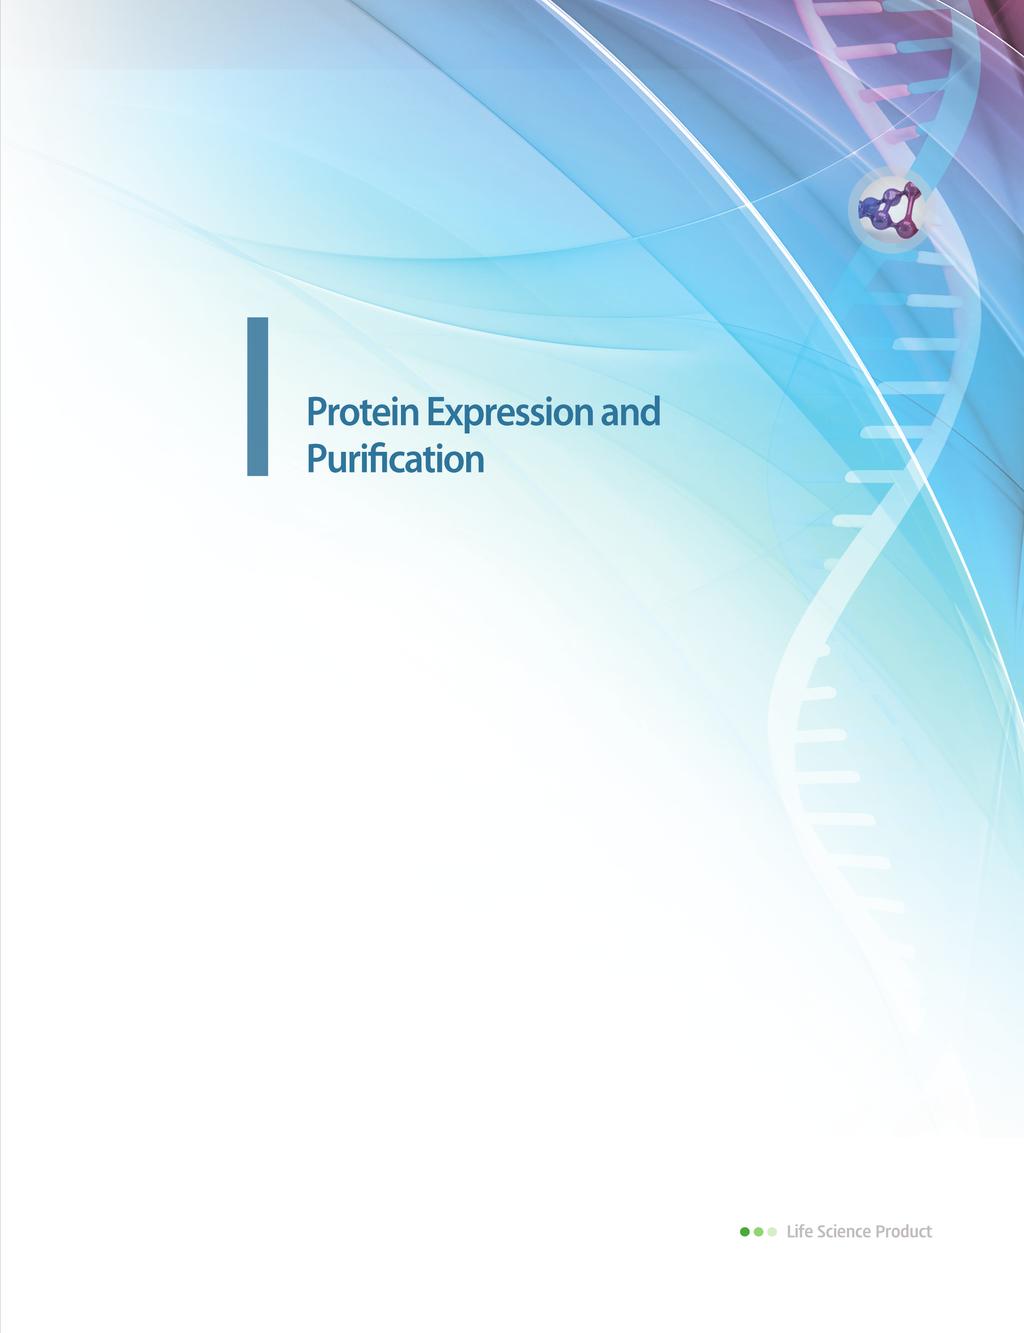 Automated Protein Expression and Purification Using ExiProgenTM Manual Protein Expression and Purification Preparation of Template